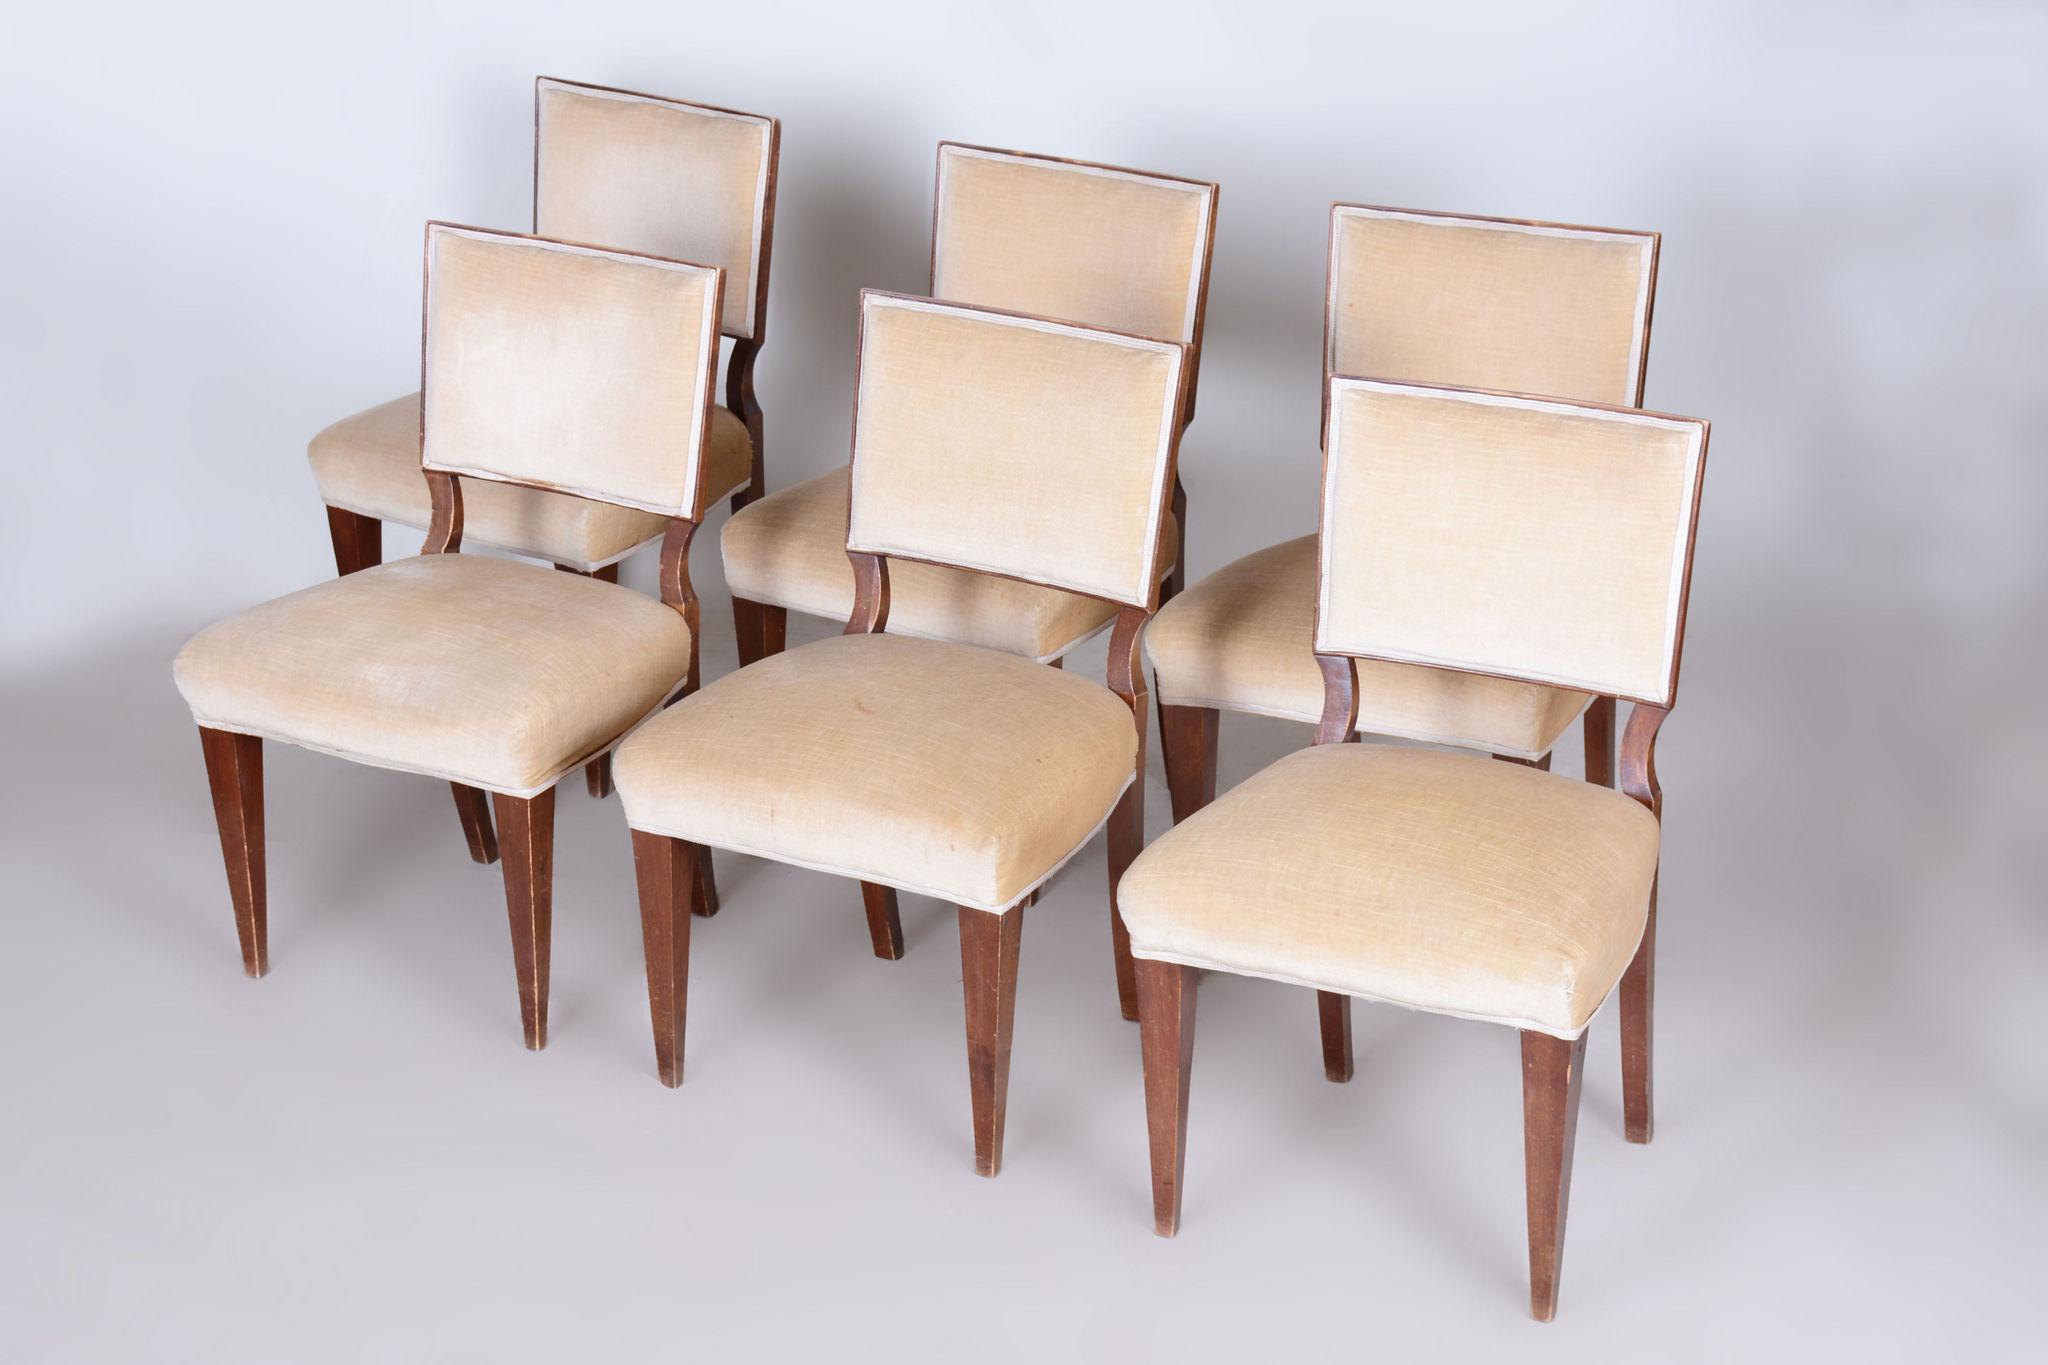 French Set of Six Original Art Deco Chairs, Solid Walnut, France, 1920s For Sale